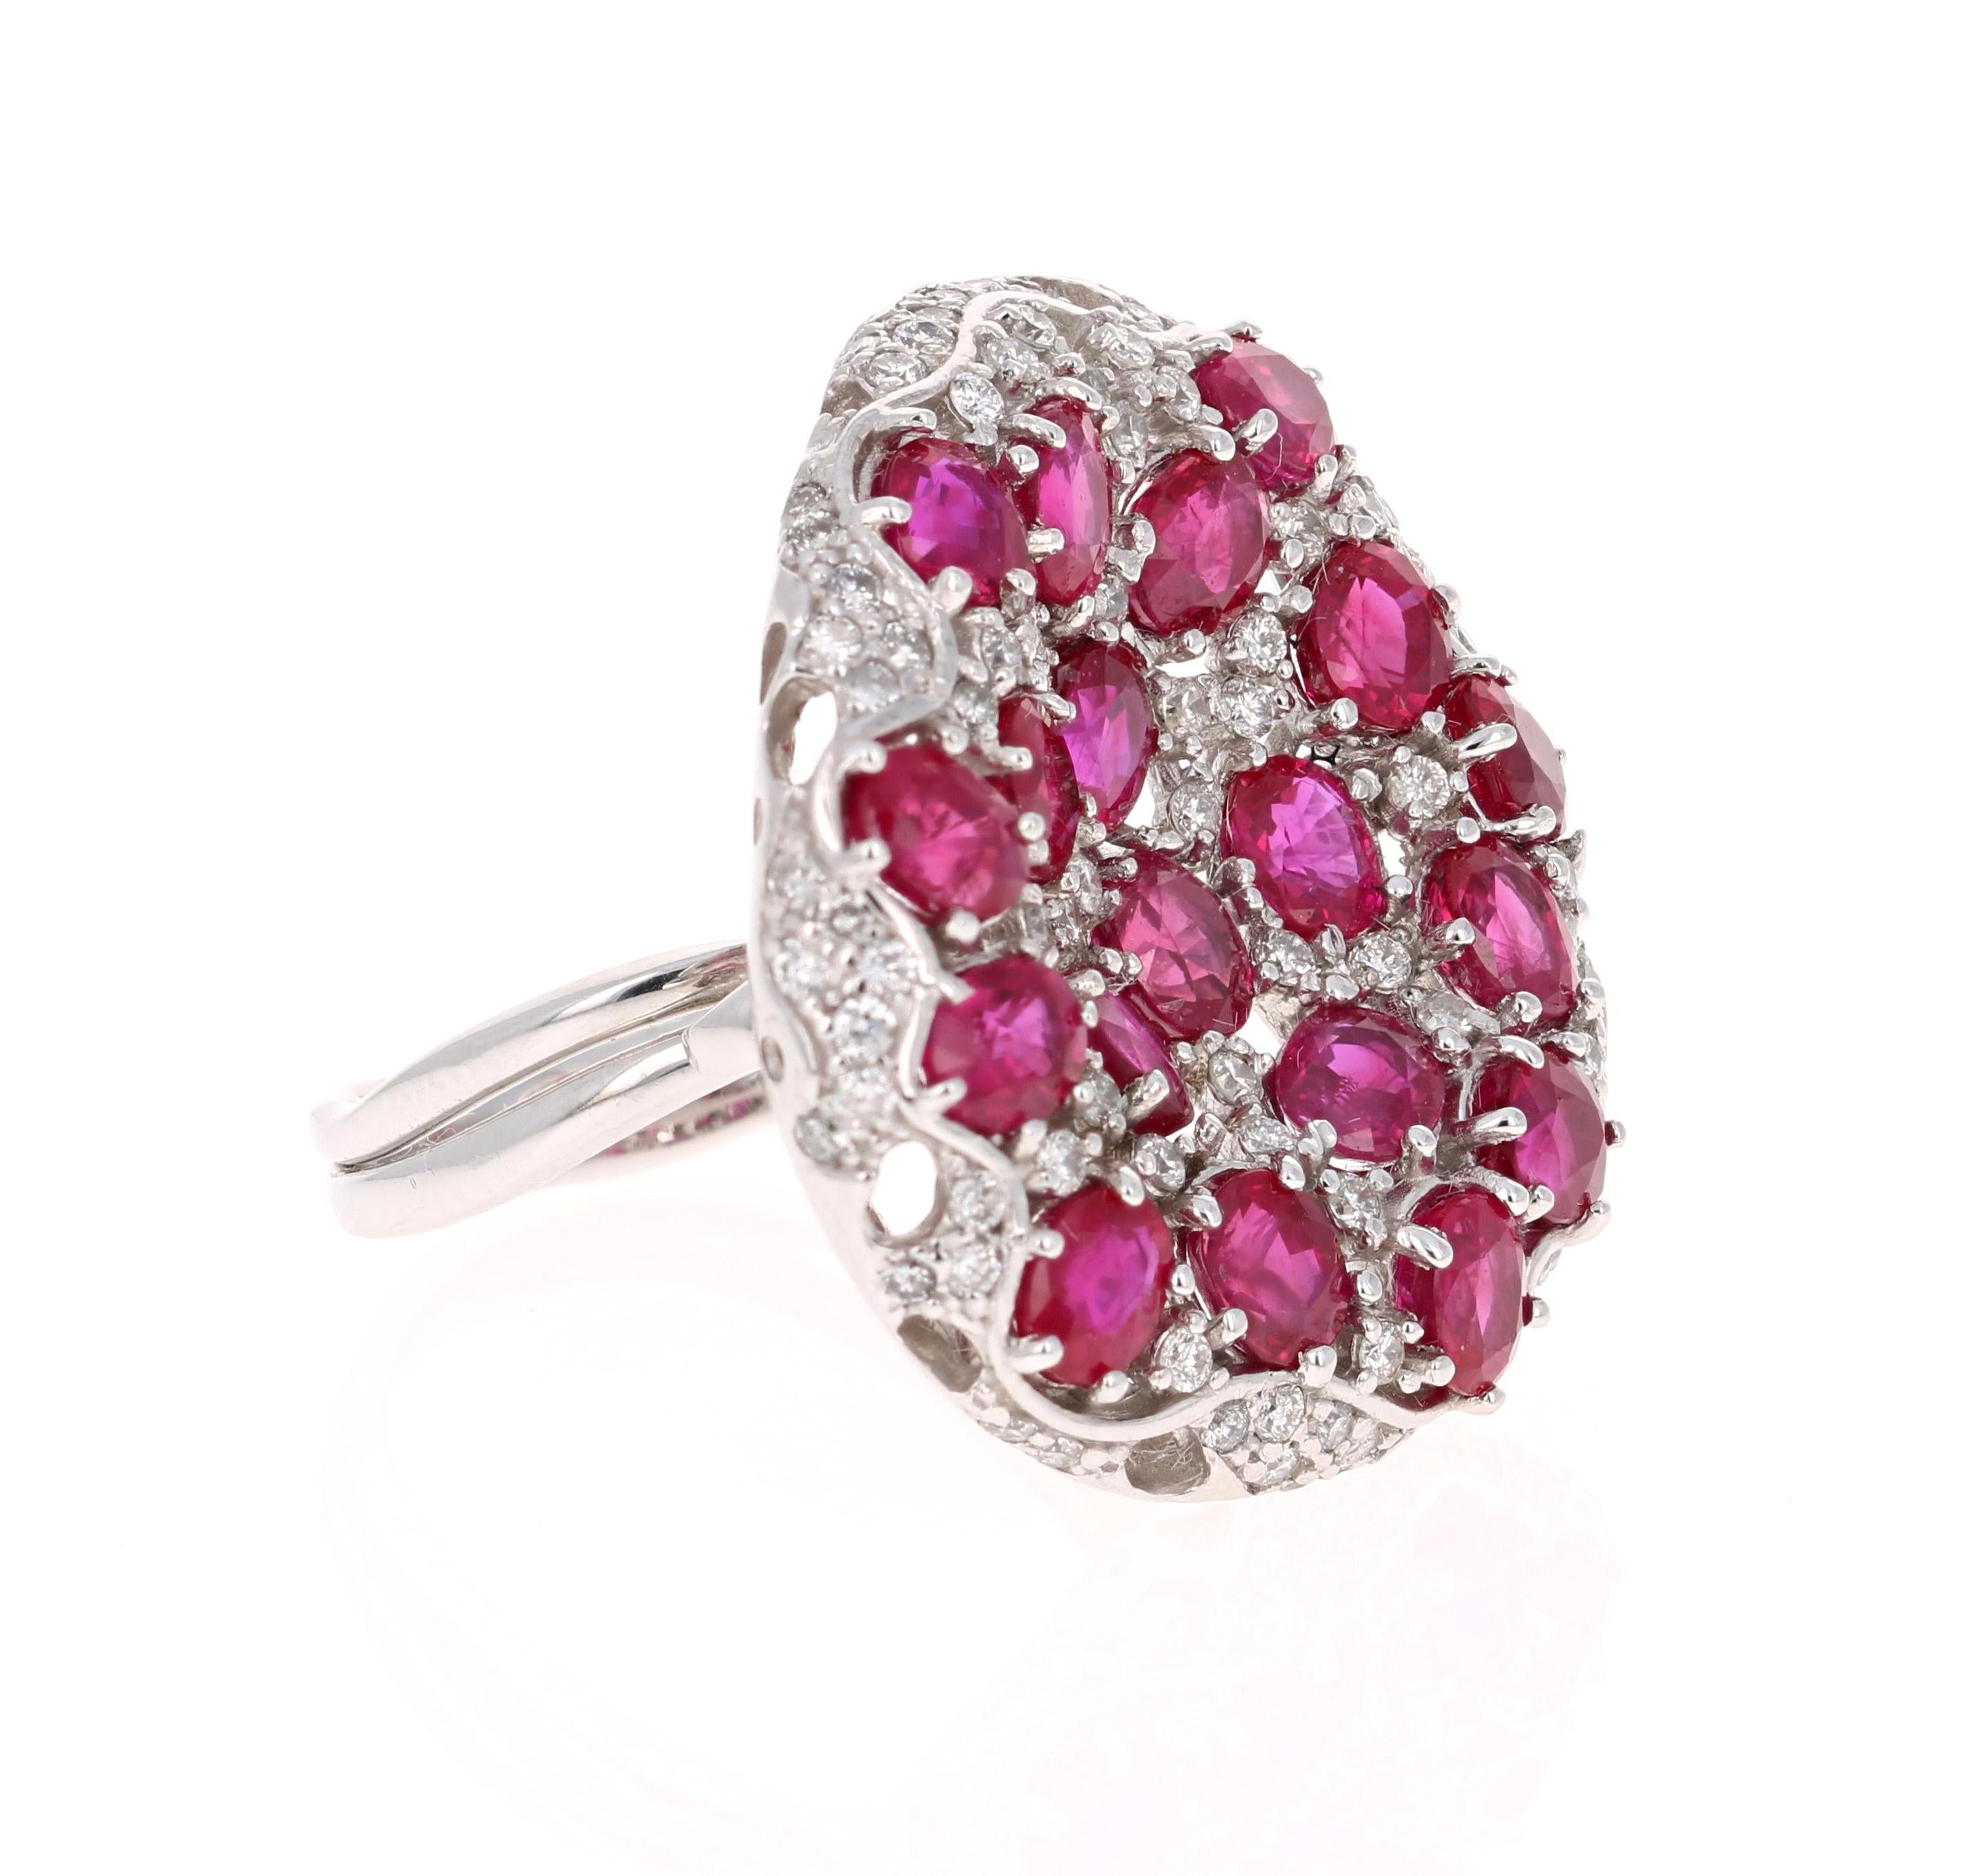 A Statement Ruby & Diamond Ring! 
This ring has multiple Oval Cut Natural Red Rubies weighing 7.77 Carats and 88 Round Cut Diamonds embellished around weighing 0.93 Carats. The clarity and color of the diamonds are SI-F. 

The ring is beautifully